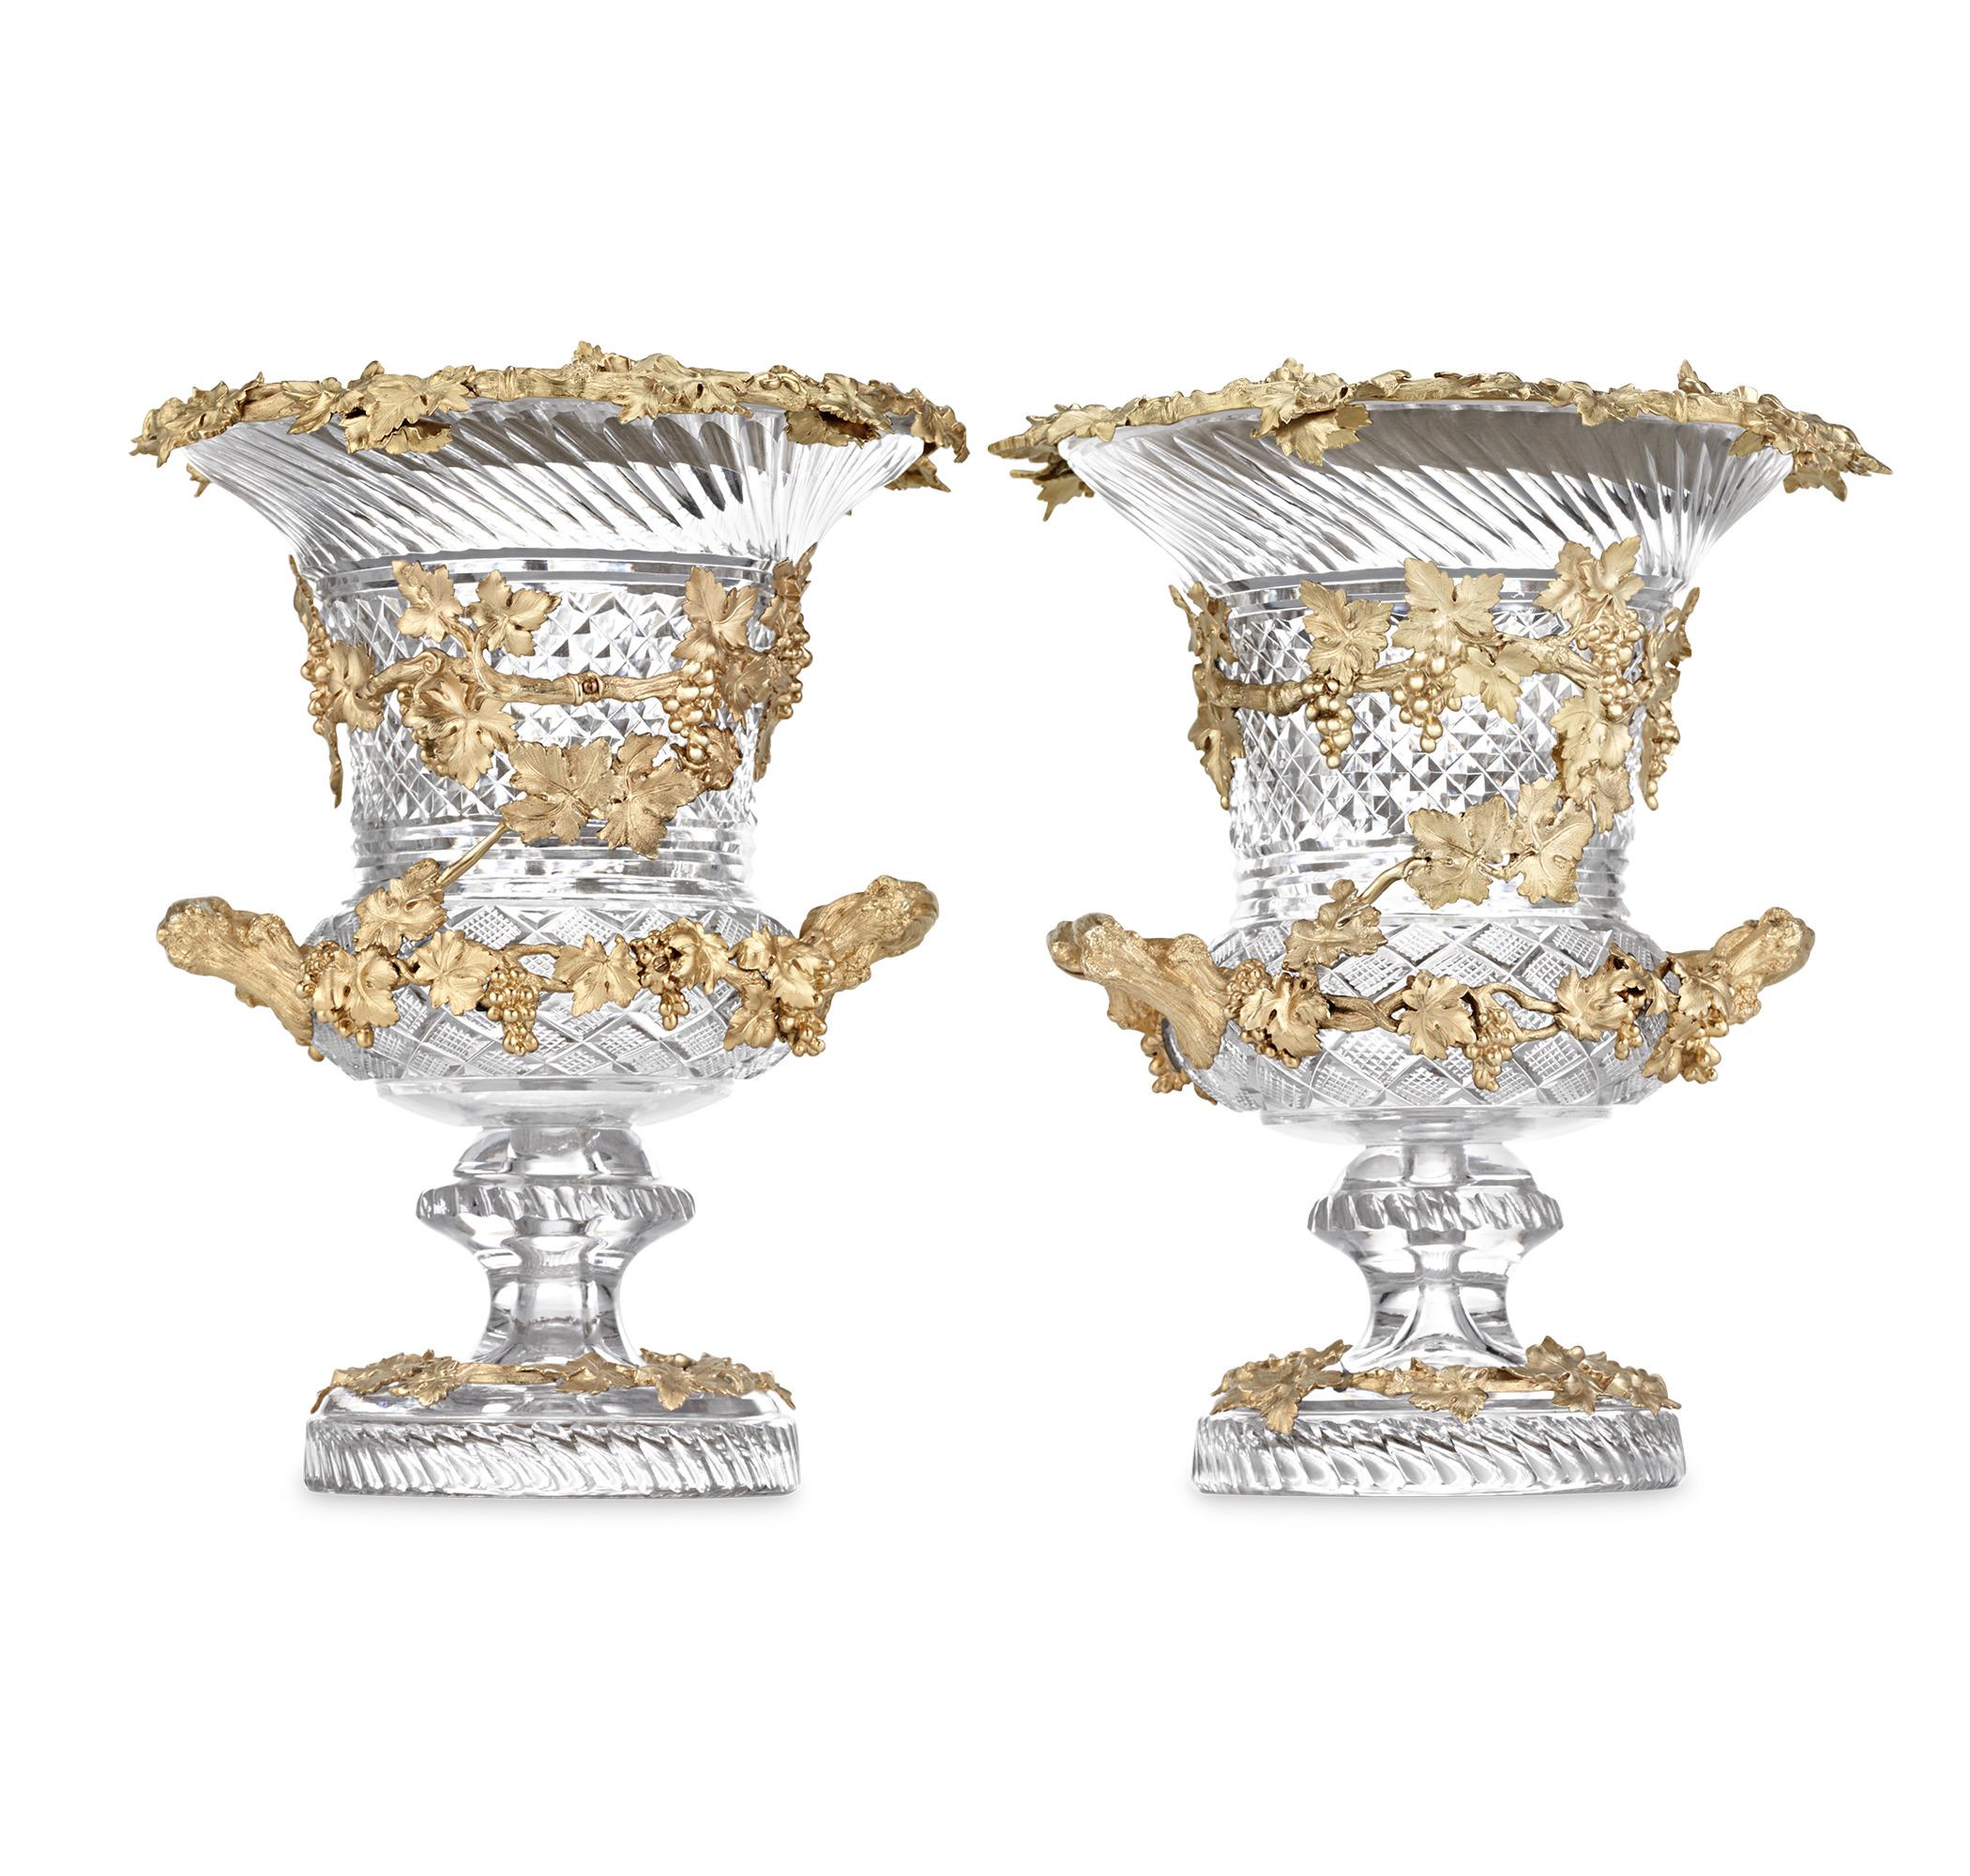 Reserved exclusively for the era’s most affluent, these exceptionally rare glass and silver gilt wine coolers by Hunt & Roskell embody the height of the mid-19th century’s grandeur and luxury. The coolers, featuring hand-etched glass and finely